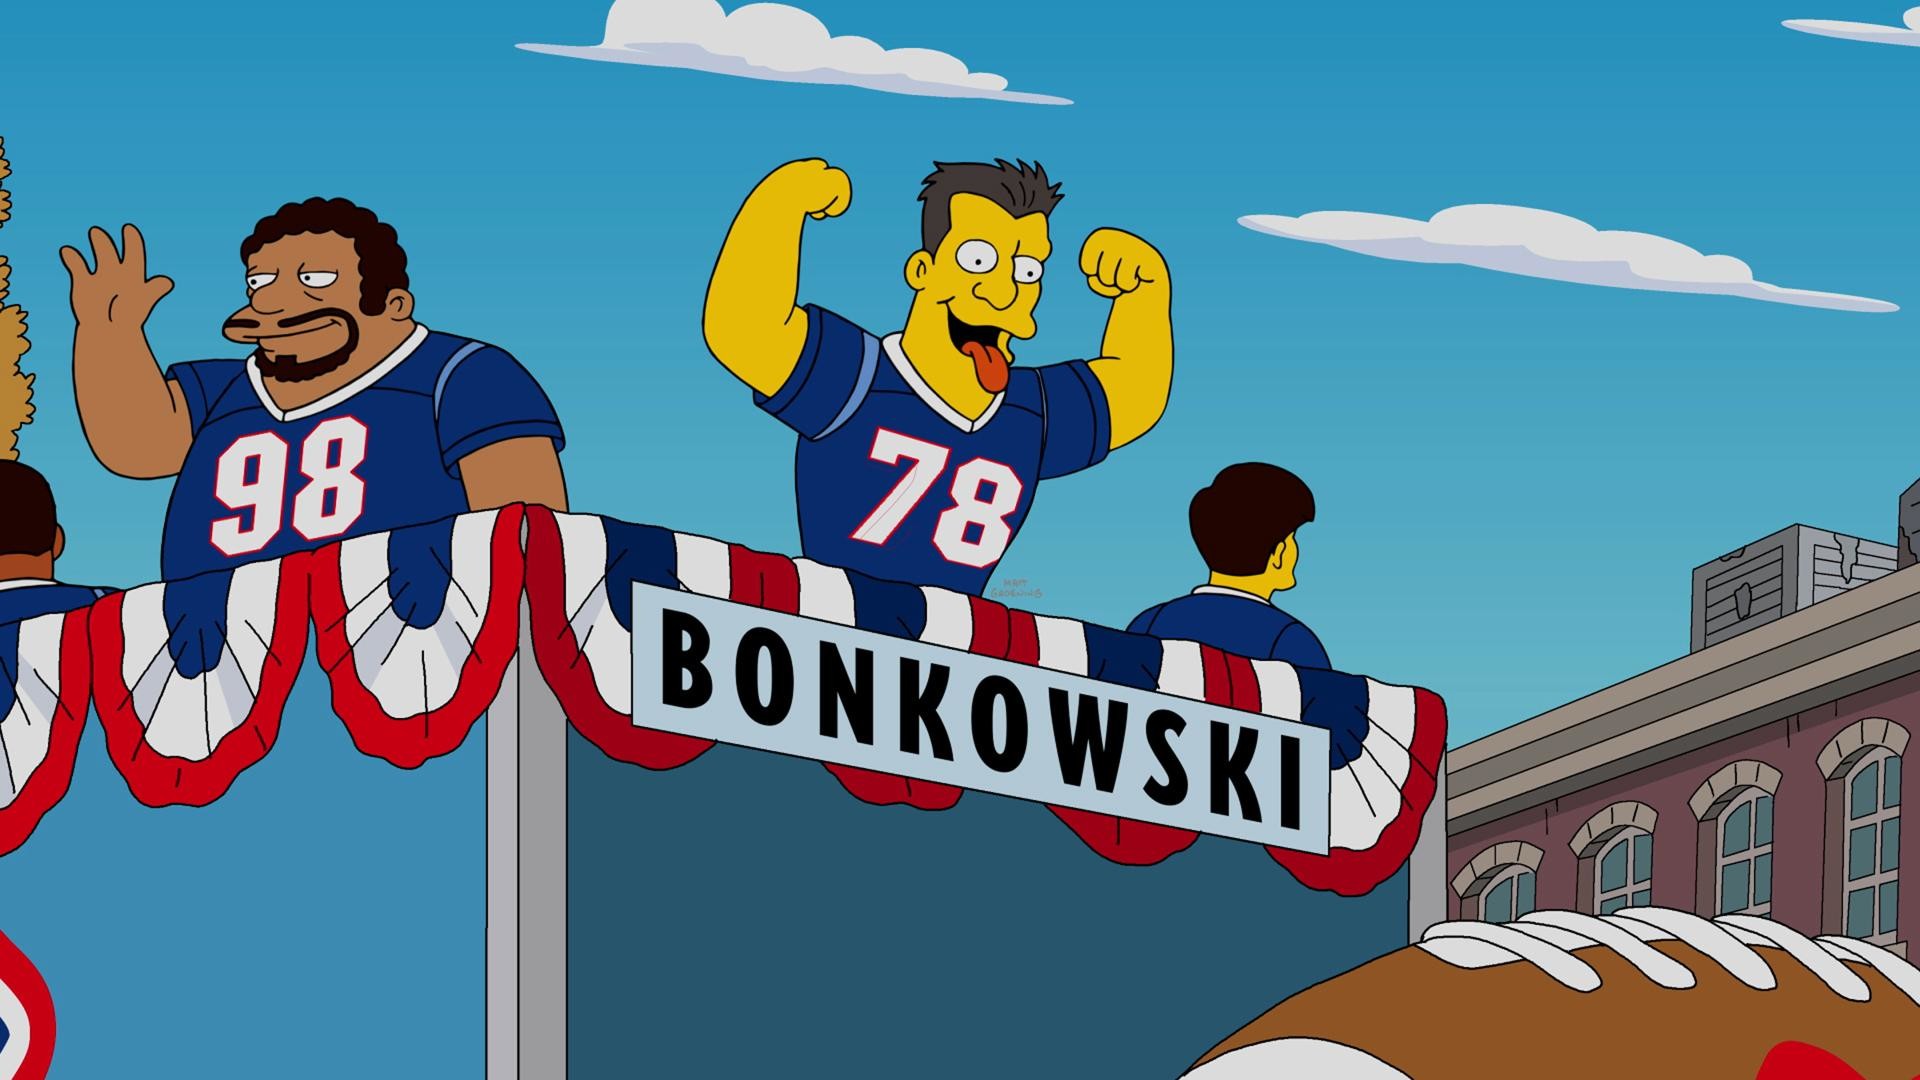 1920x1080 Boston sports allusions in the episode include a football player named  “Bonkowski.”